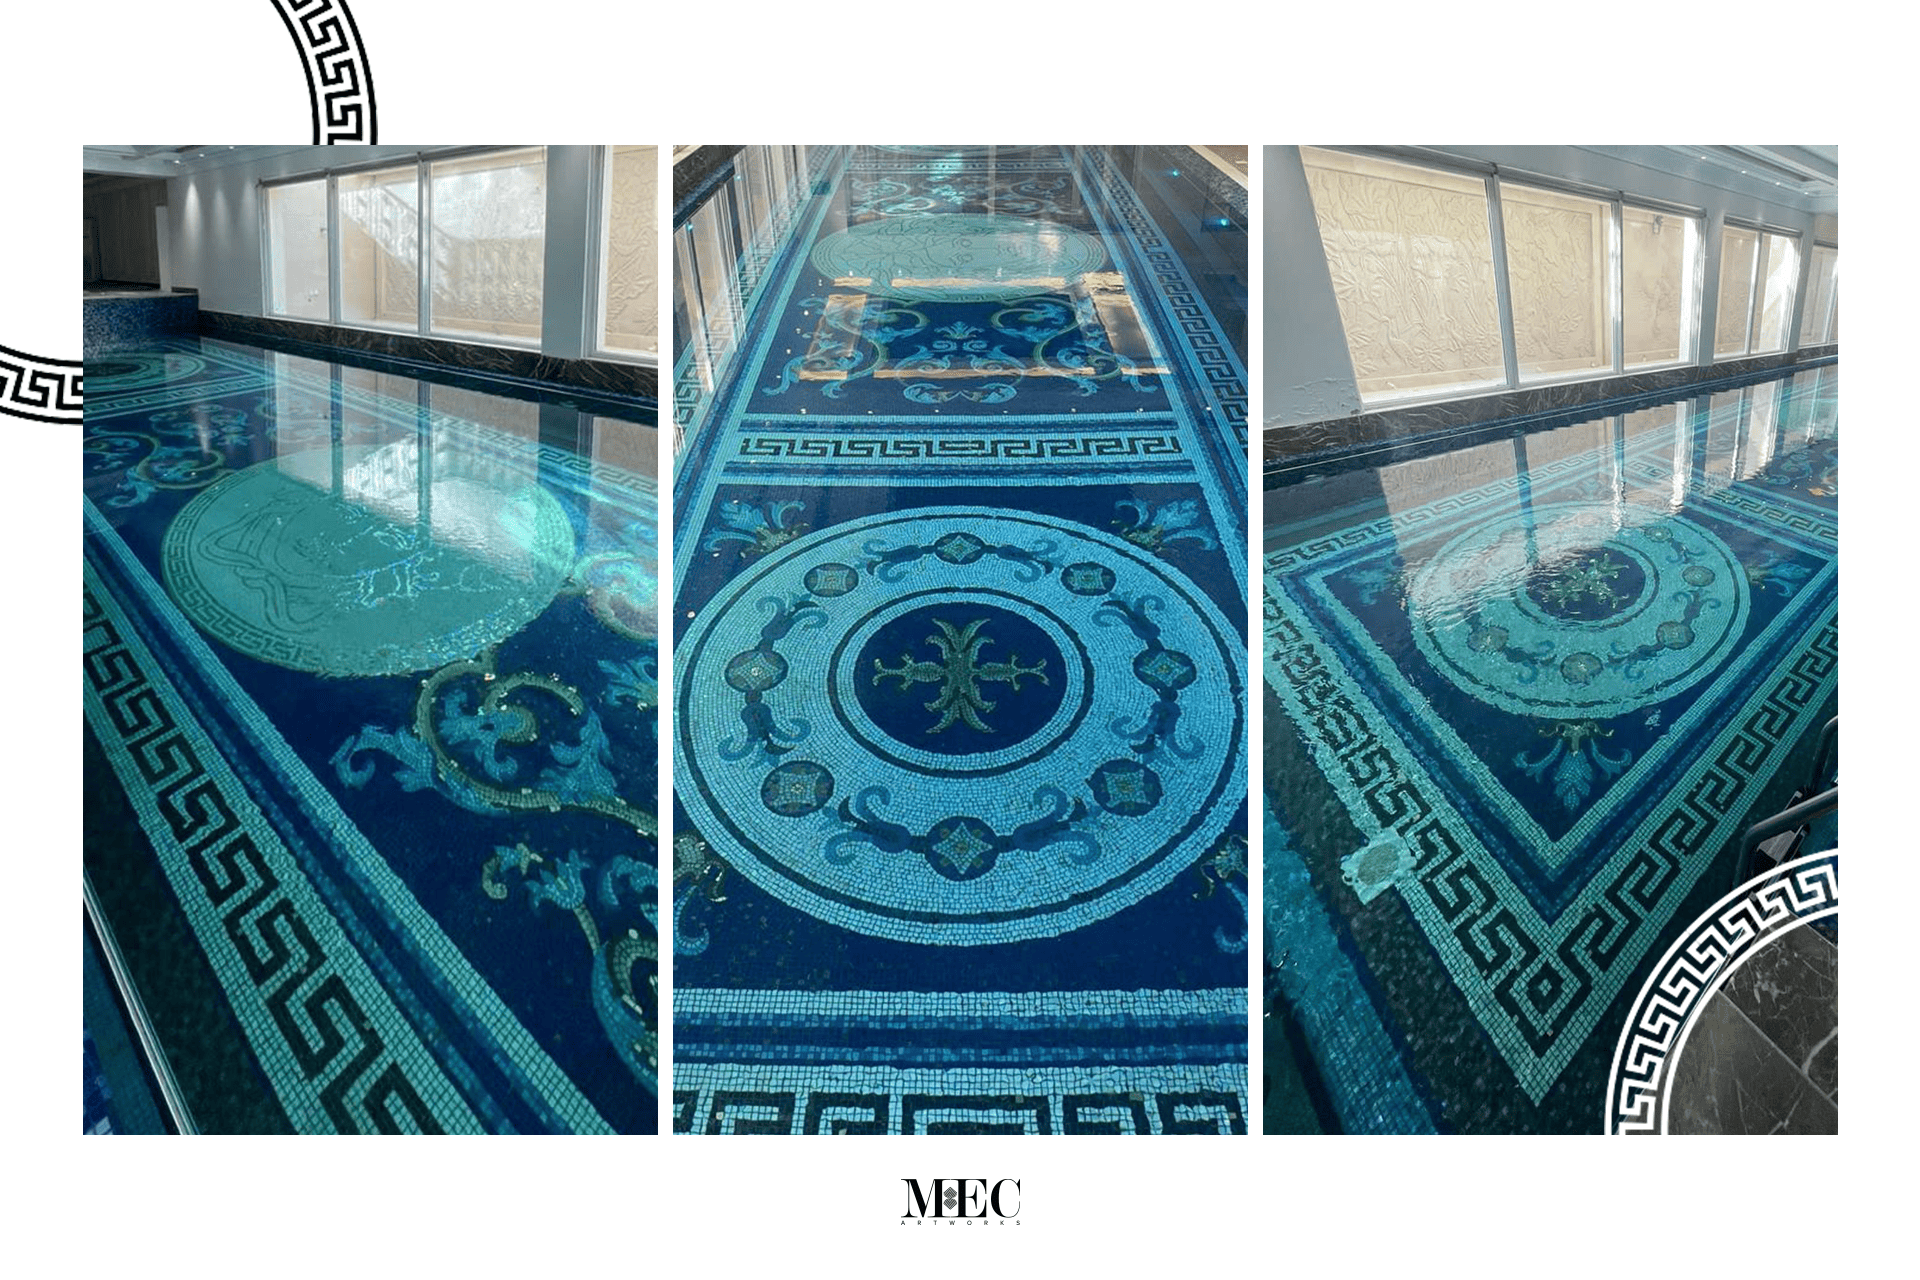 A three-panel image of a luxurious Versace Mosaic with detailed patterns and rich blue tones.